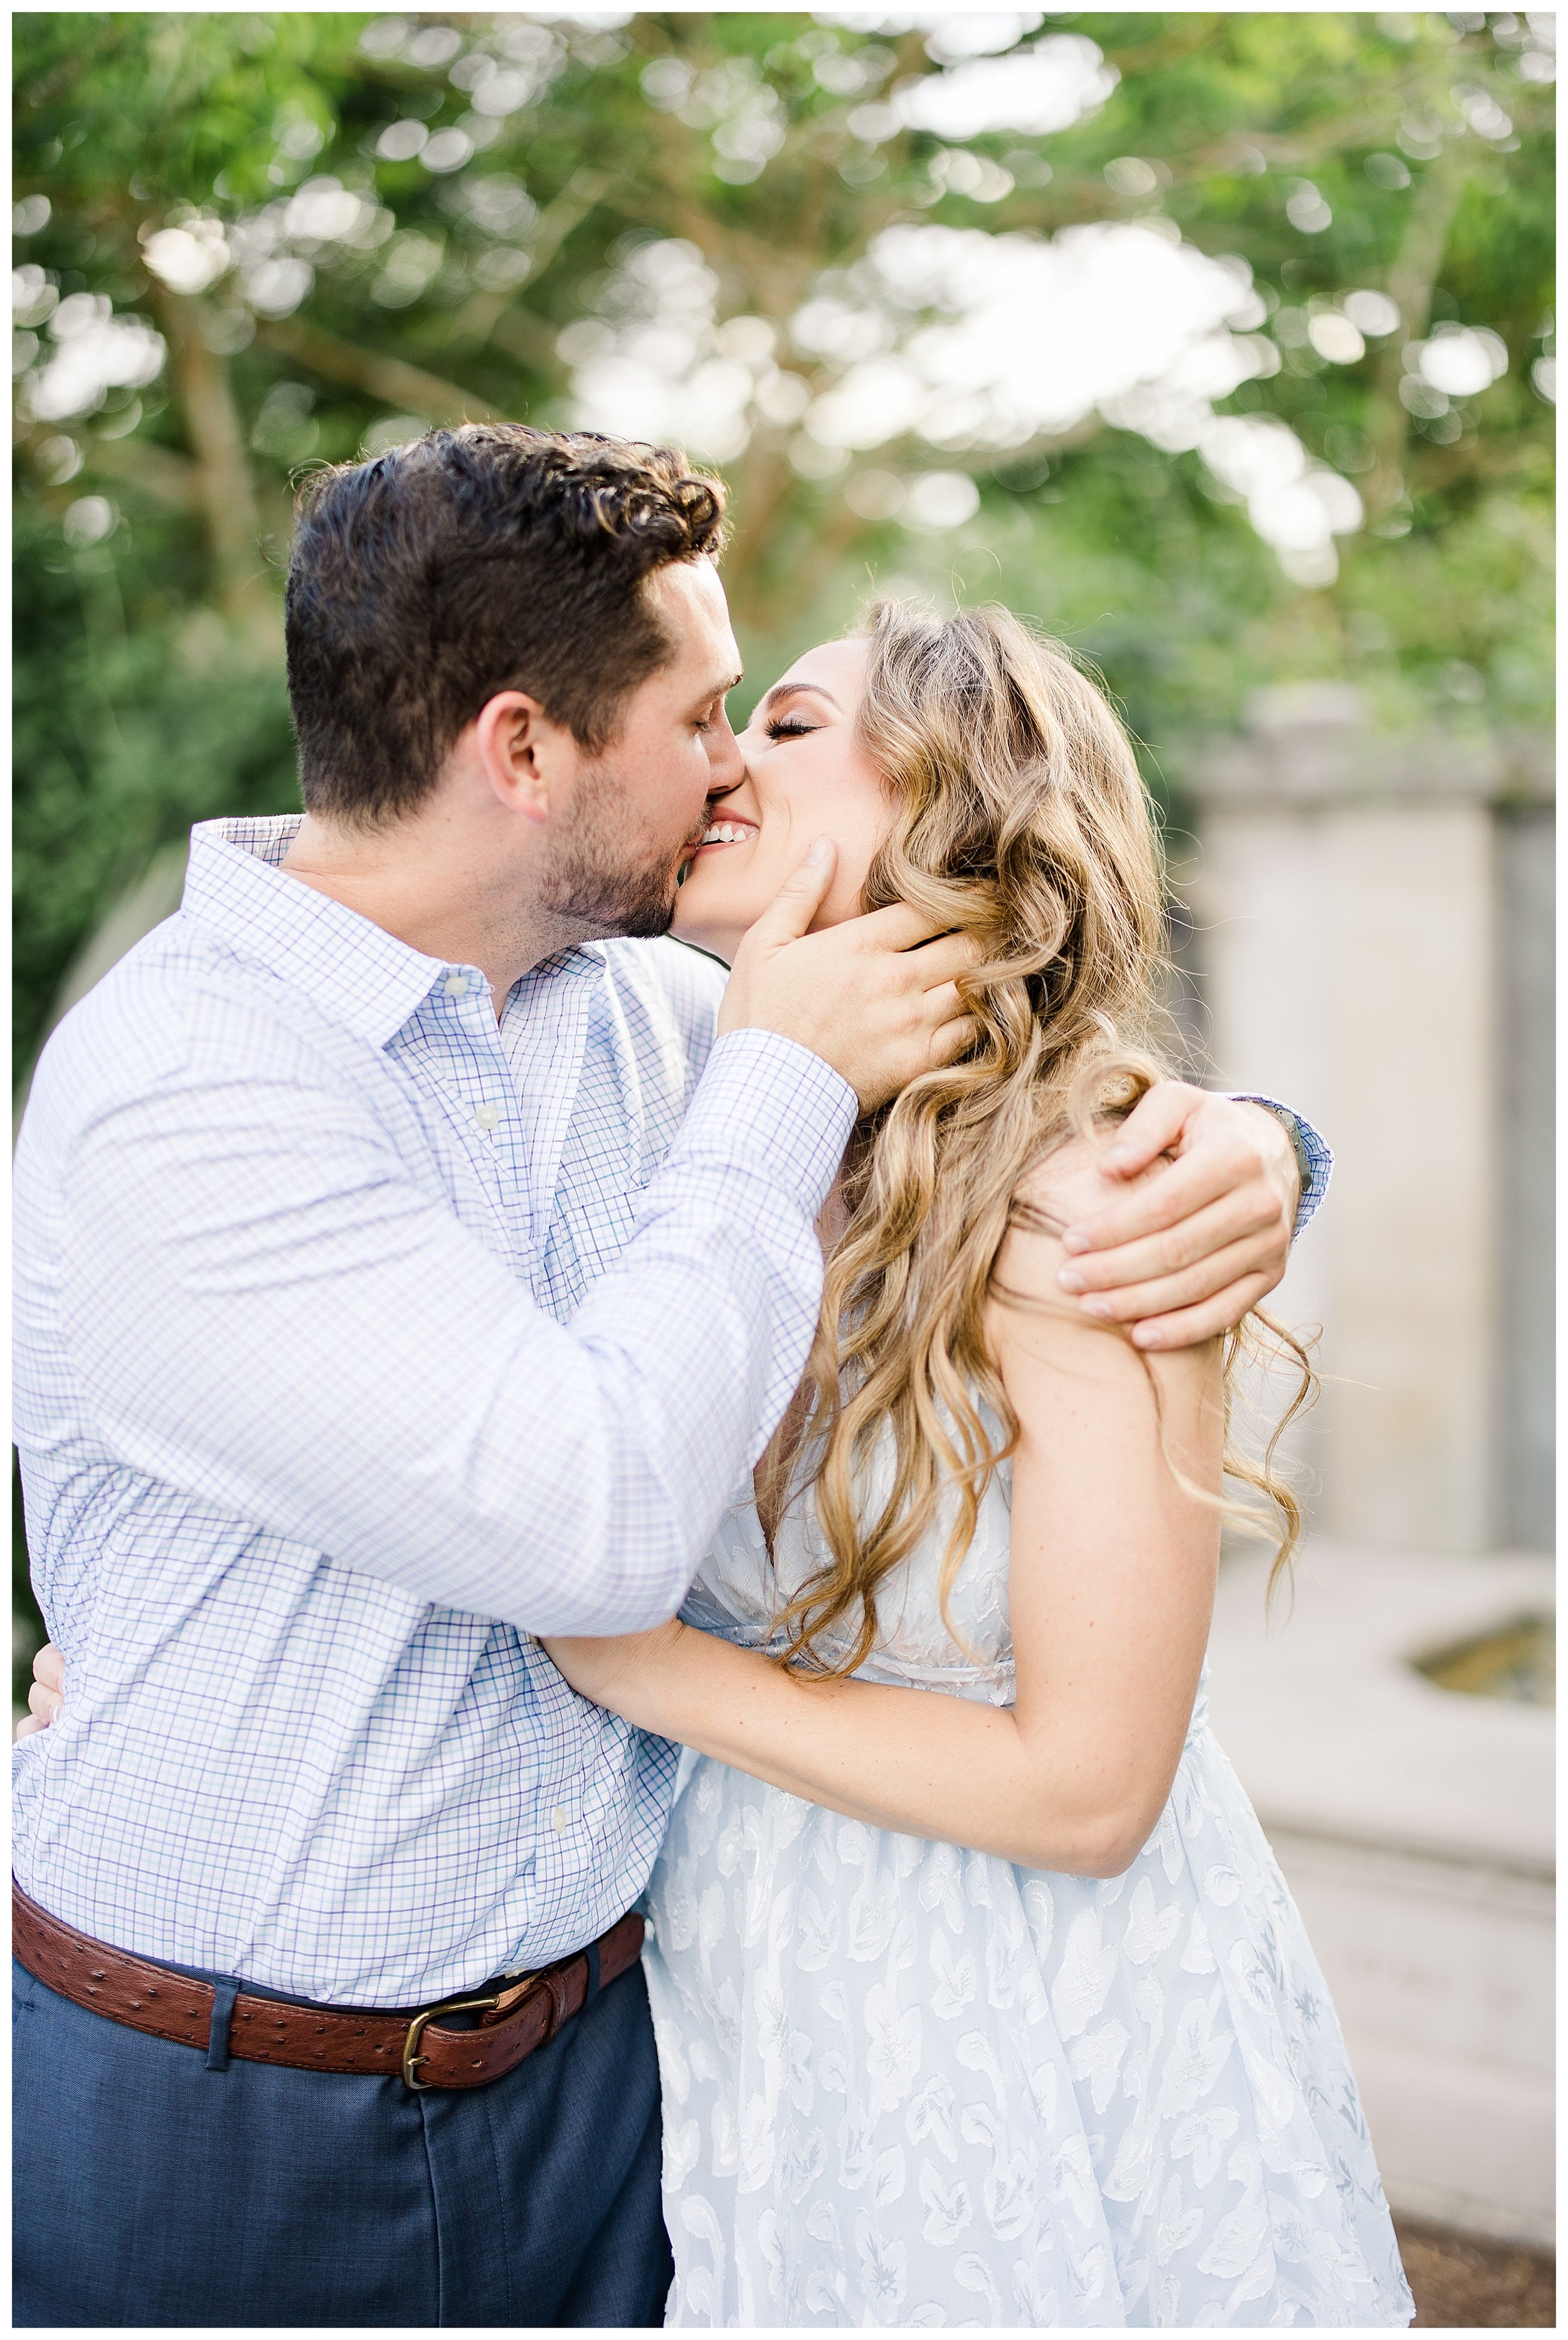 Ninamarie + Mitchell's Downtown Columbus Engagement Session - Starling ...